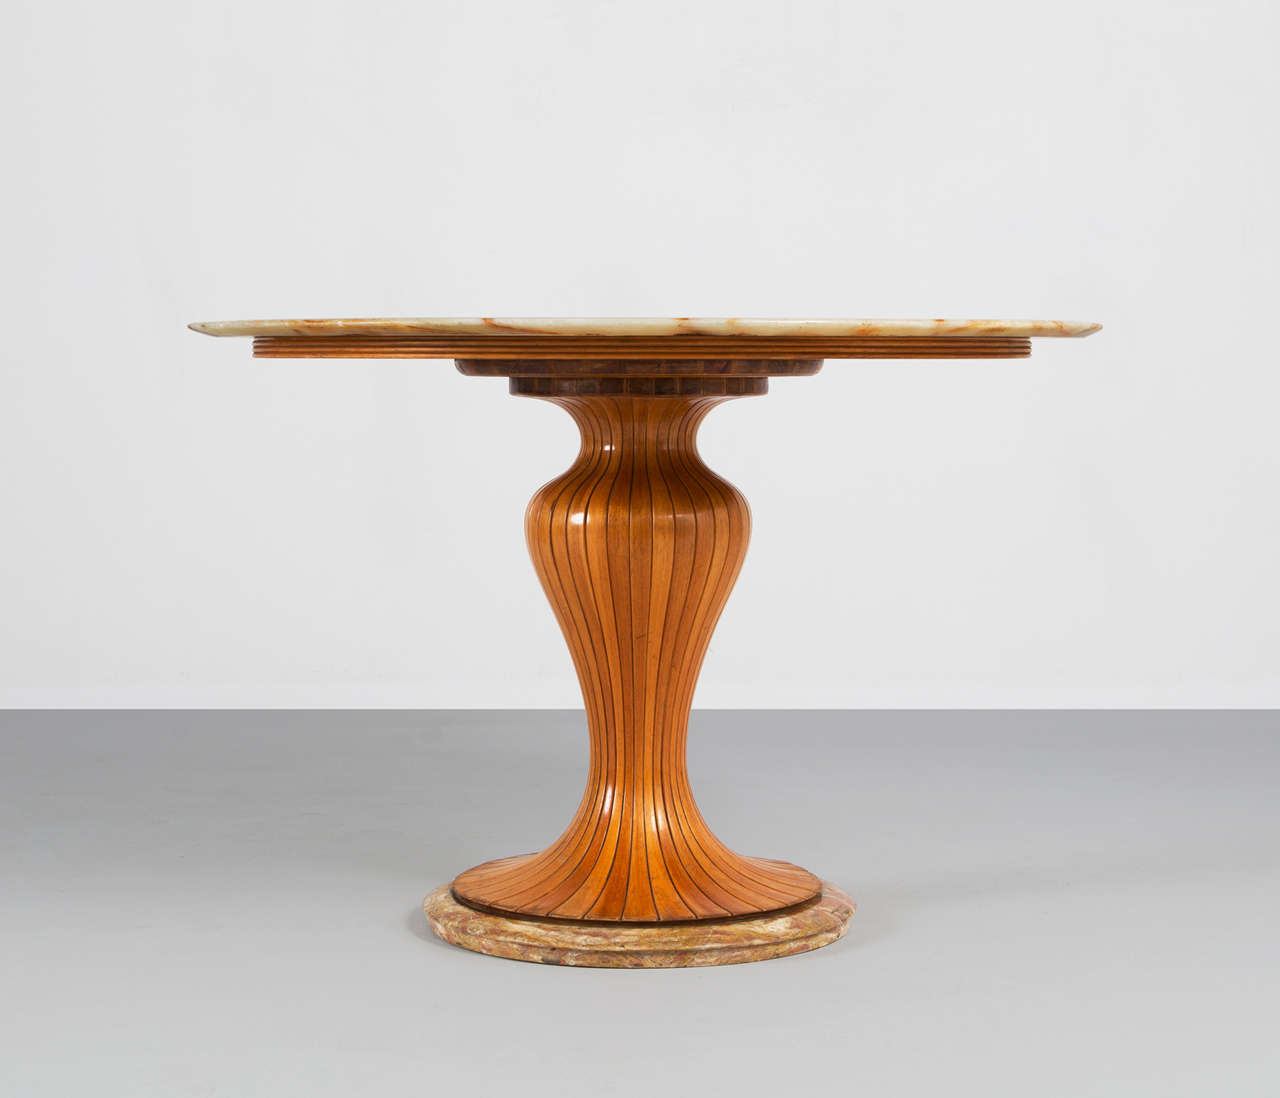 Center table, in mahogany and marble, by Osvaldo Borsani for Arredamento Borsani, Italy, 1940s. 

Borsani is well known for his modernist designs at Tecno Milano. Before he began Tecno with his twin brother, Borsani designed furniture at his